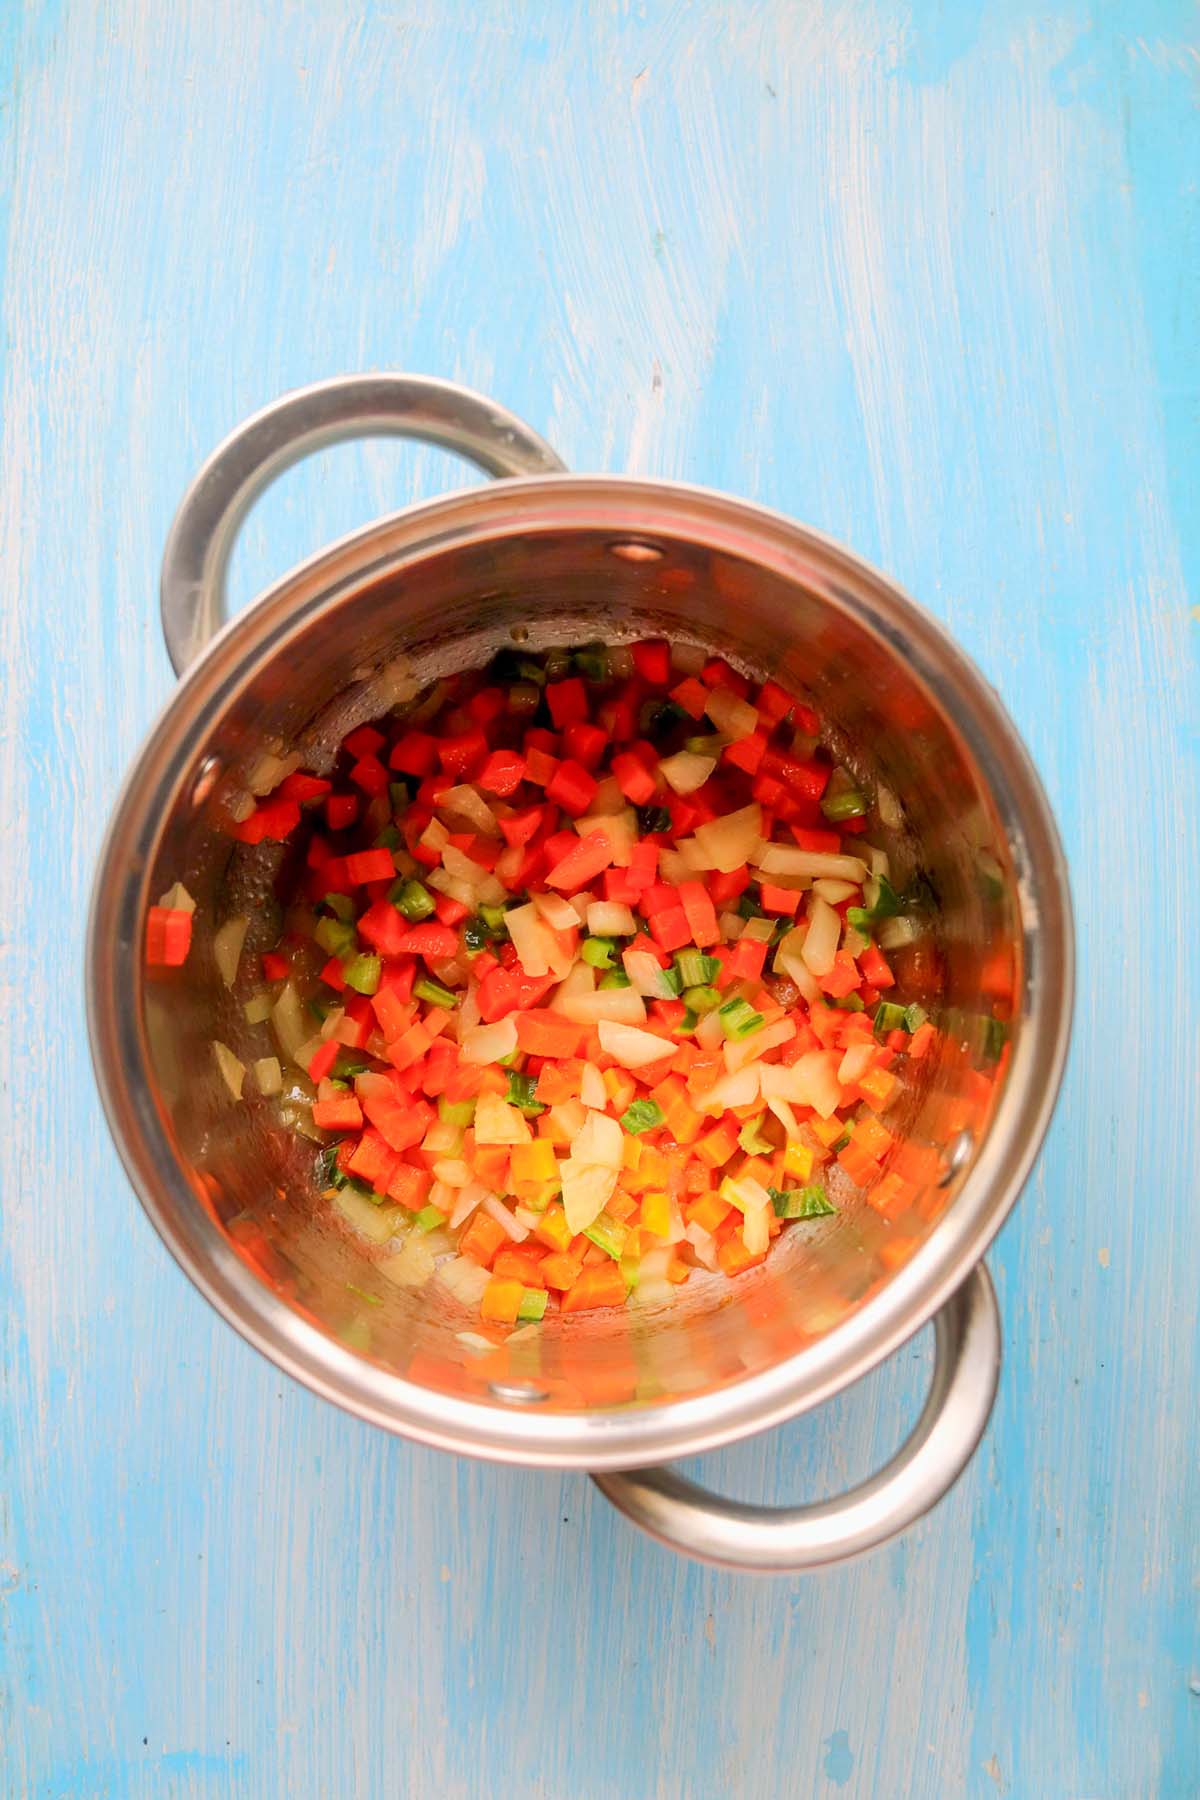 The mirepoix in a pot with olive oil.